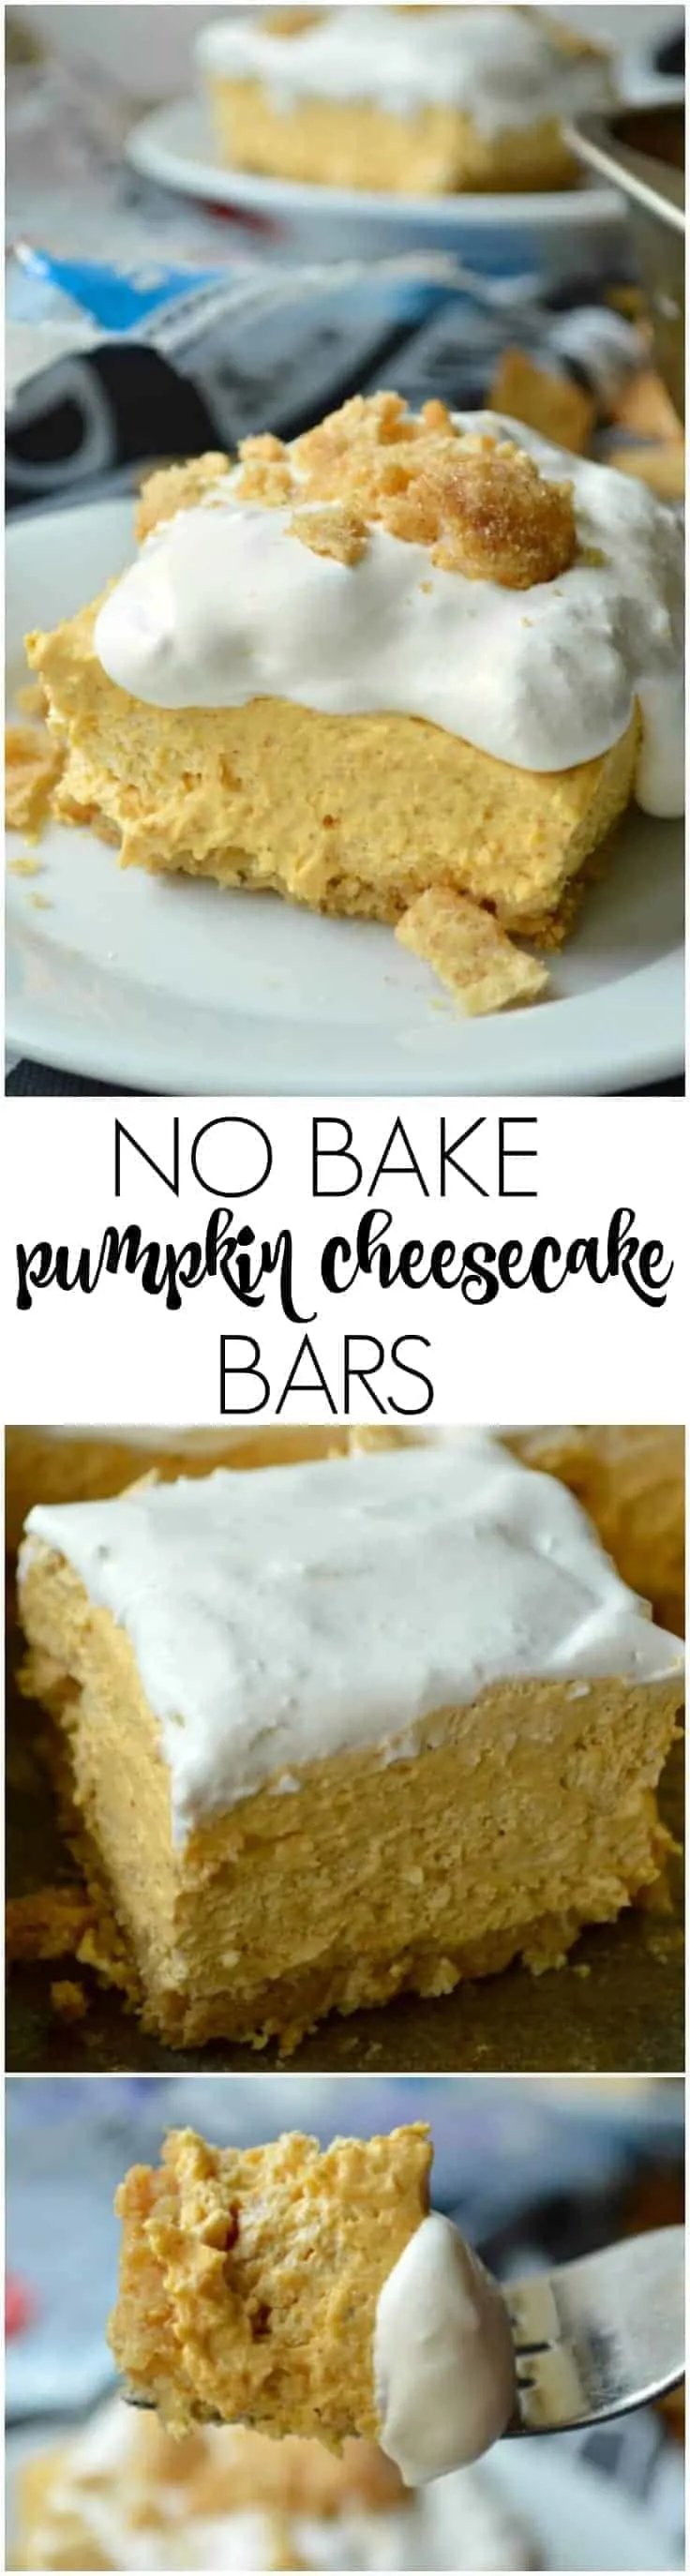 These easy No Bake Pumpkin Cheesecake Bars have a cinnamon sugar crust that will make you swoon, and require just 15 minutes of work!